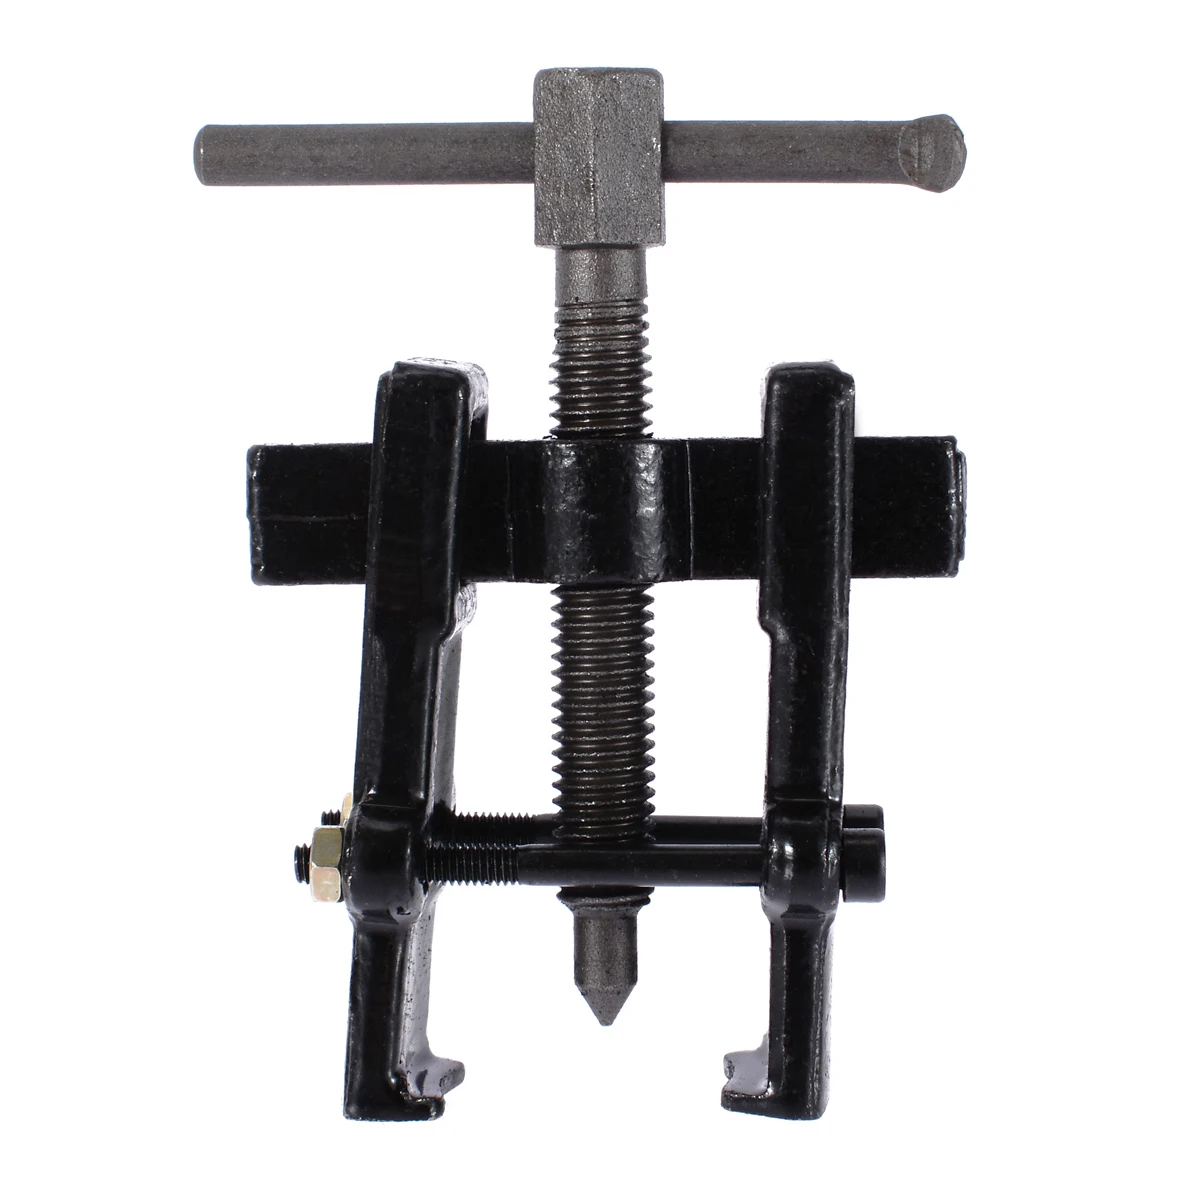 

Hot Sale 1 Set Two Jaw Gear Pulley Bearing Puller 2" 4" 6" Small Leg Large Mechanics For Repairing Car Tools Kits High Quality